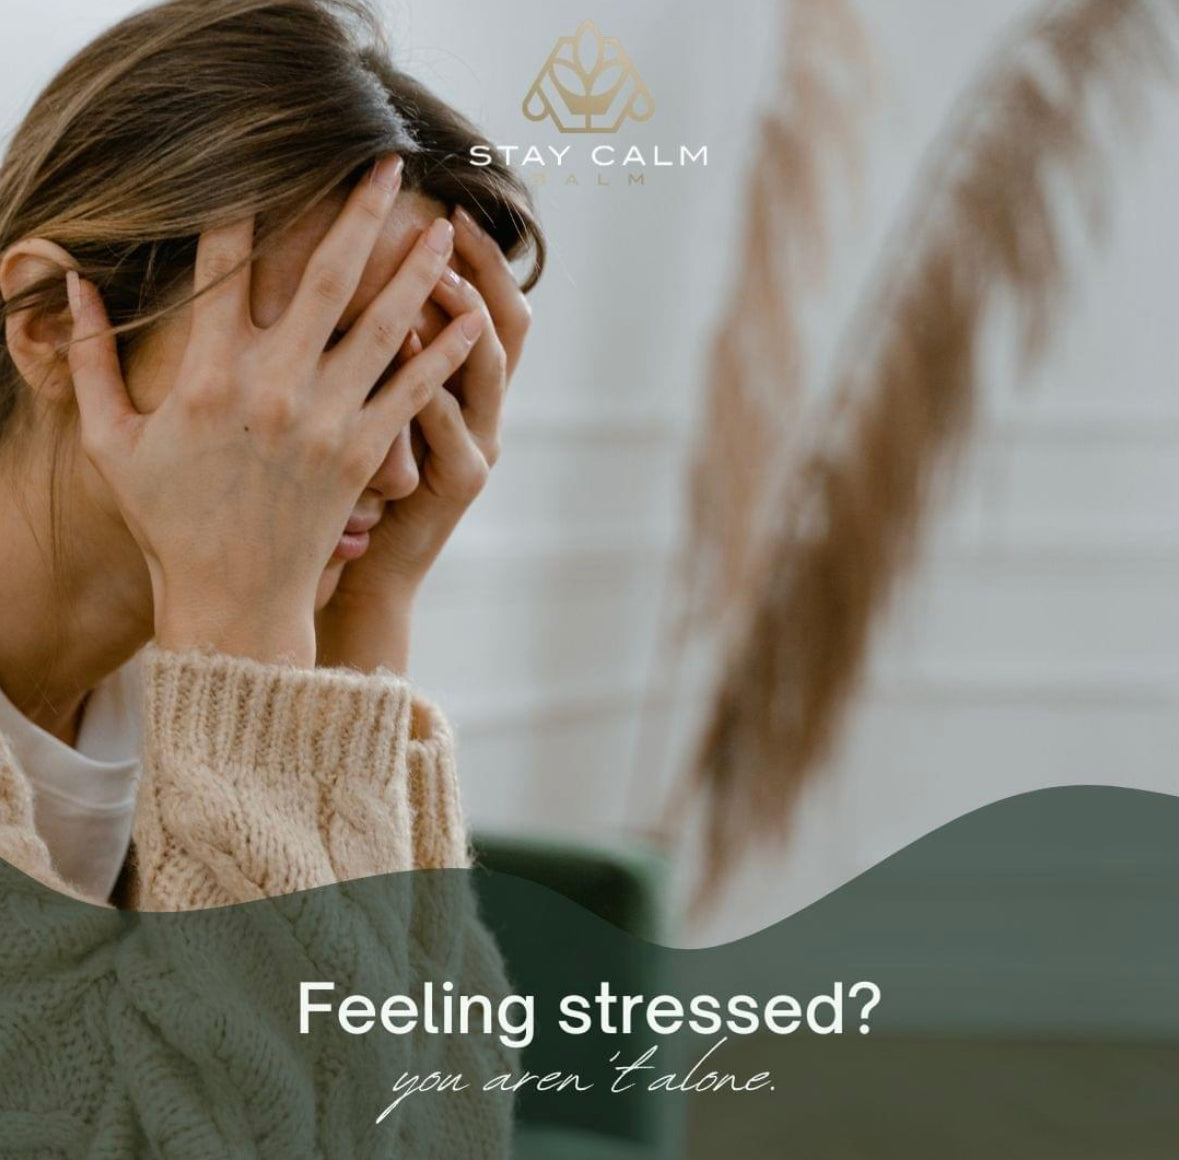 Feeling stressed? You’re not alone …